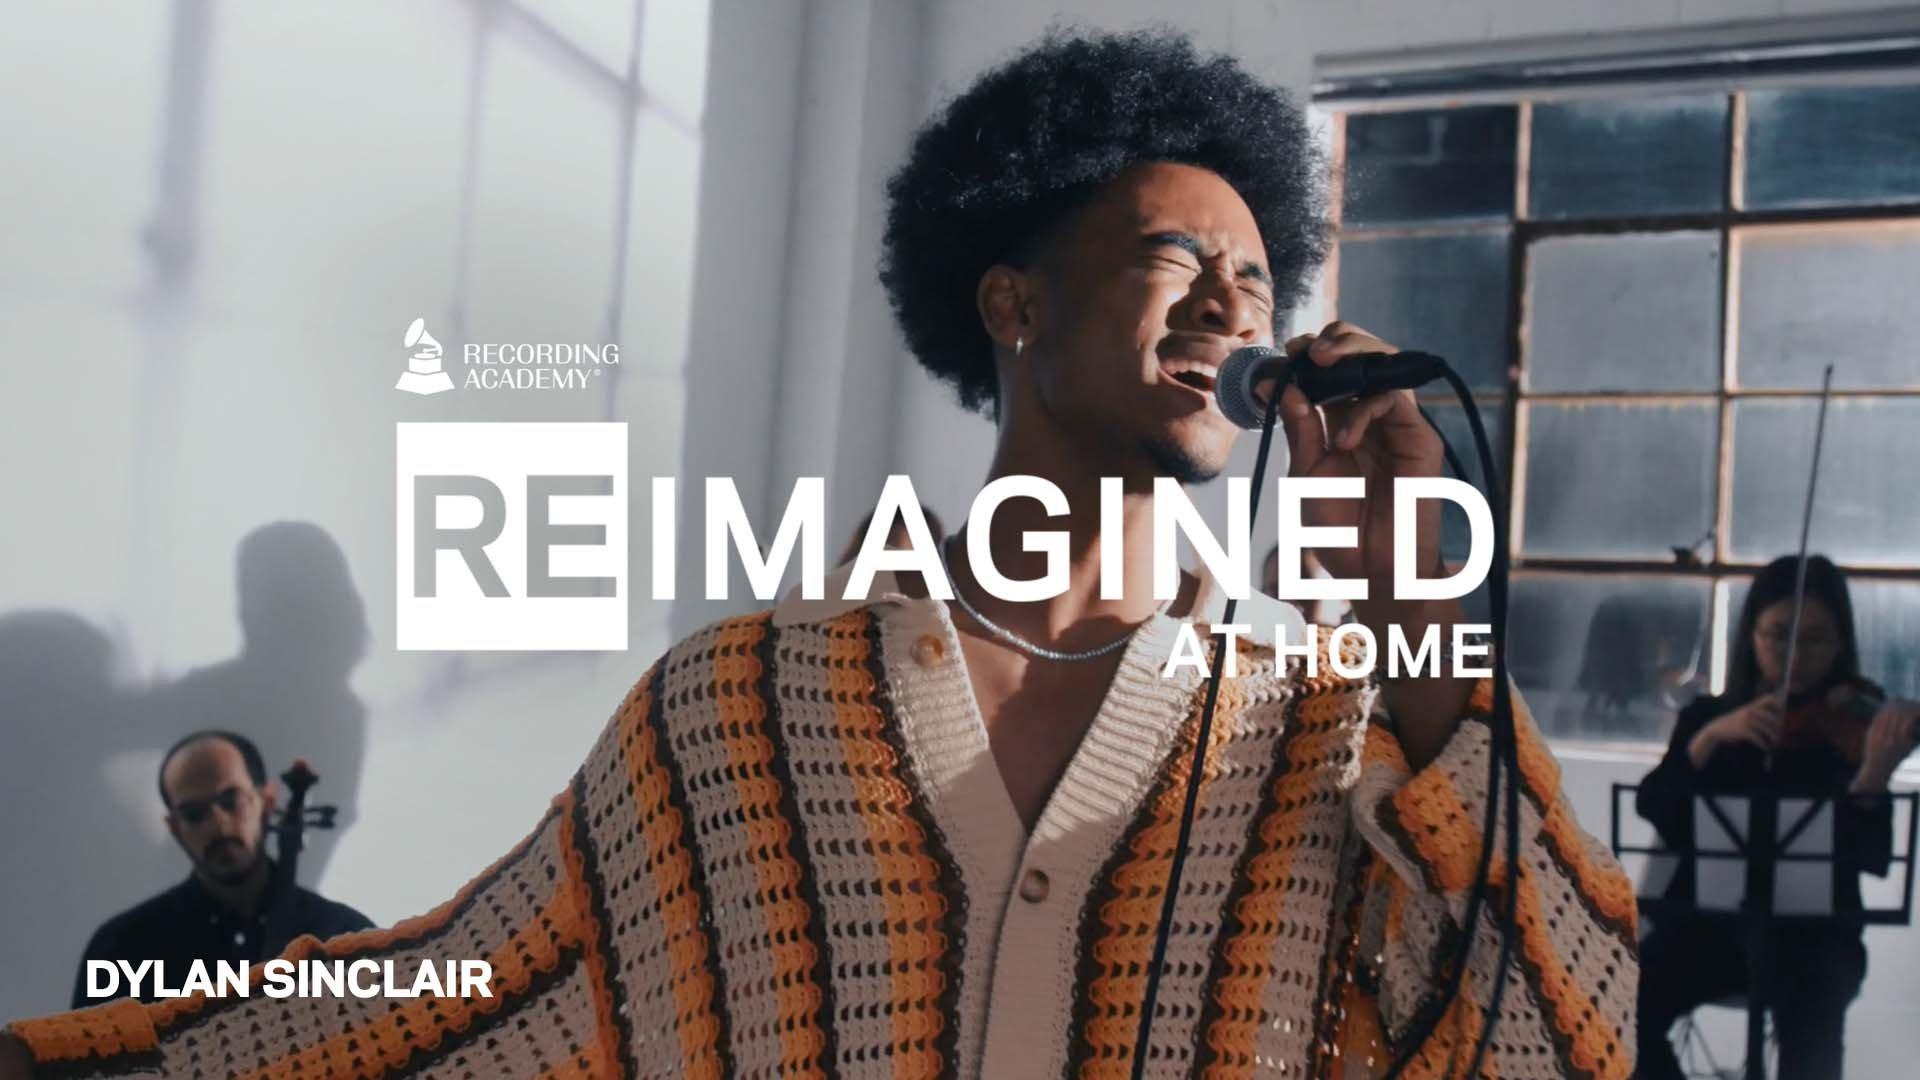 Watch Dylan Sinclair's Ethereal Cover Of Kirk Franklin's "Hello Fear" | ReImagined At Home